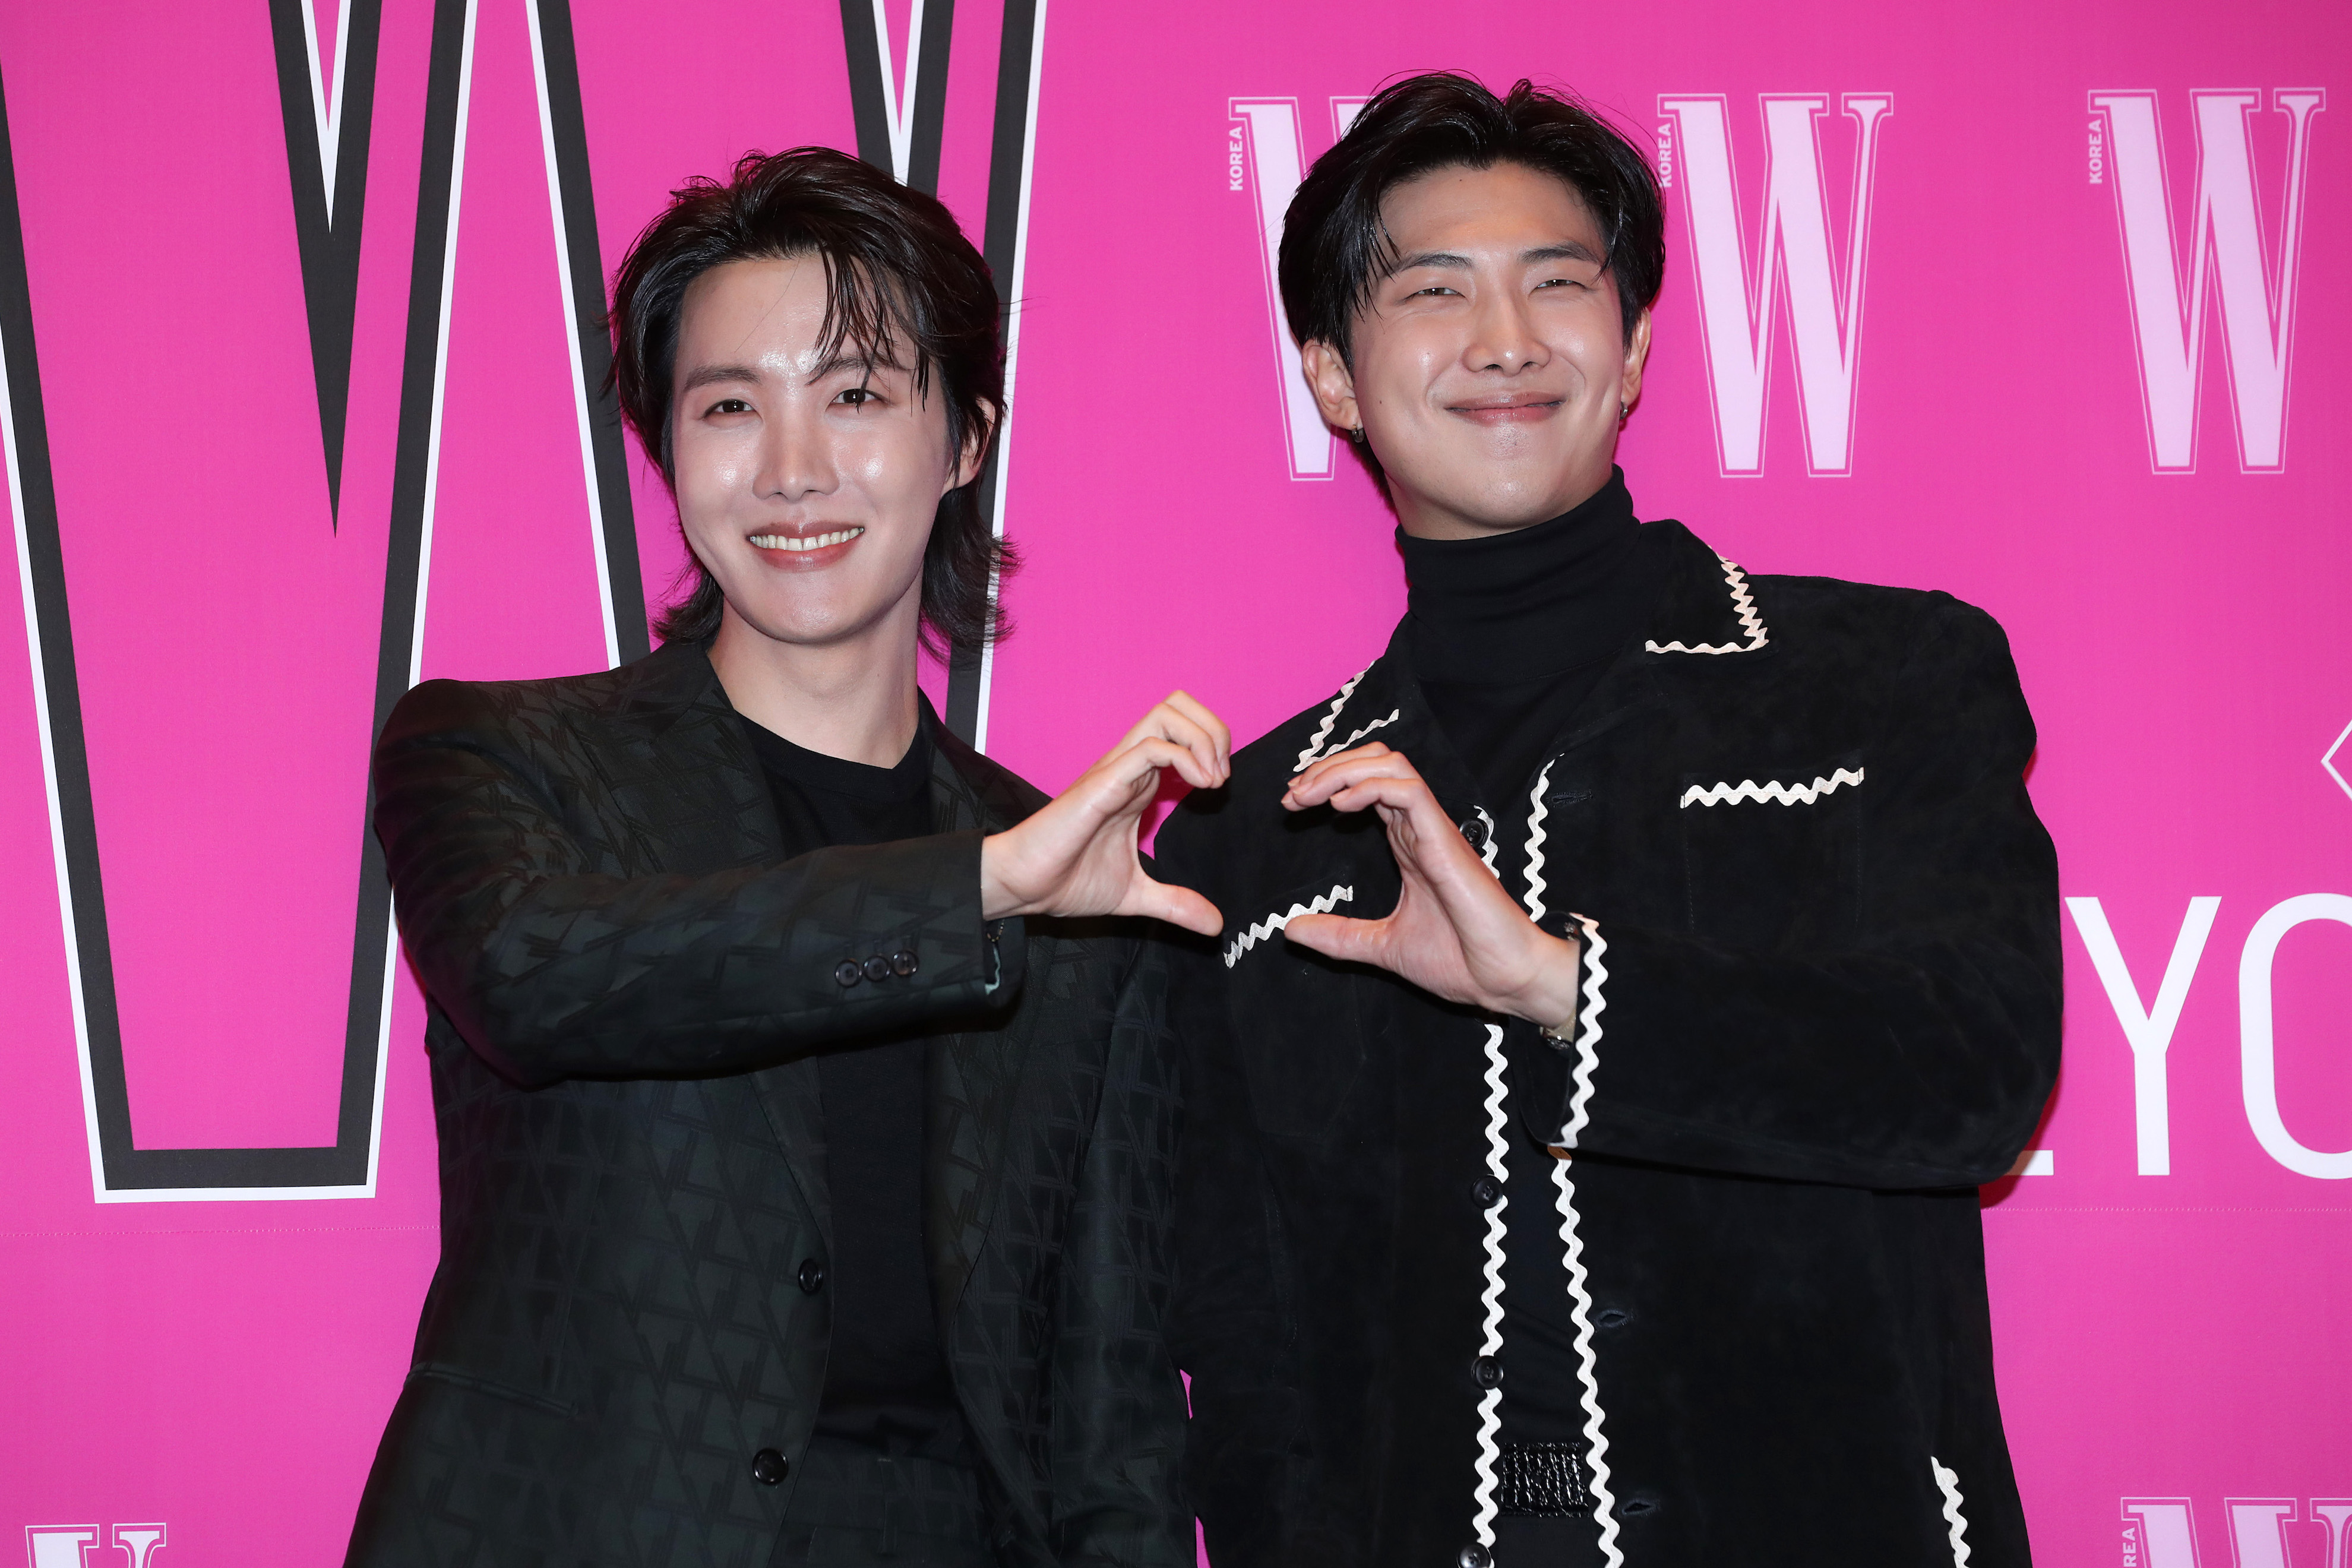 J-Hope and RM of boy band BTS pose for photographs at the W Magazine Korea Breast Cancer Awareness Campaign